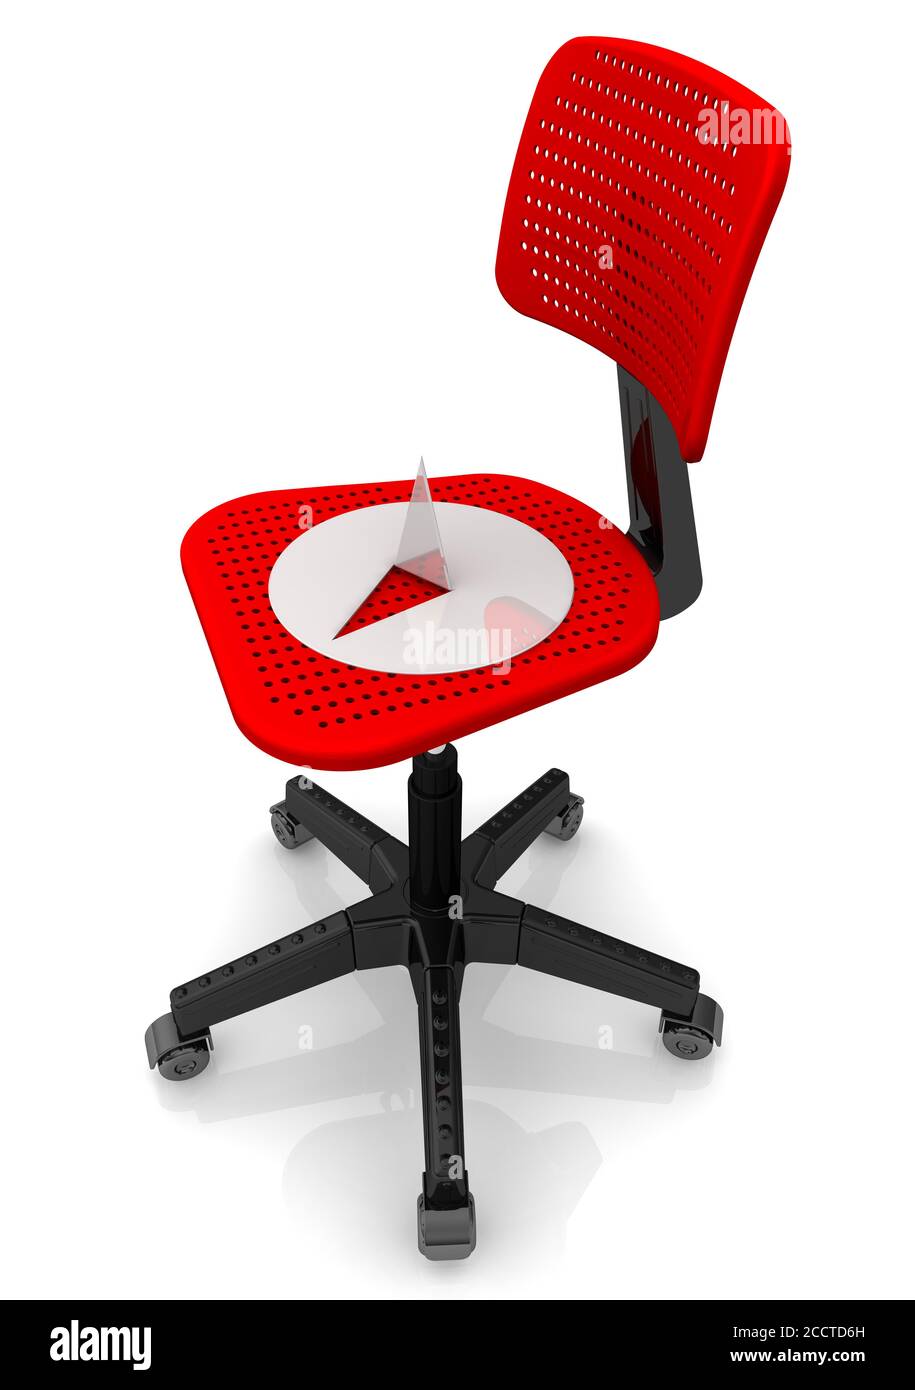 Thumbtack lying on an office chair. One large and sharp thumbtack lying on an office chair. 3D illustration Stock Photo